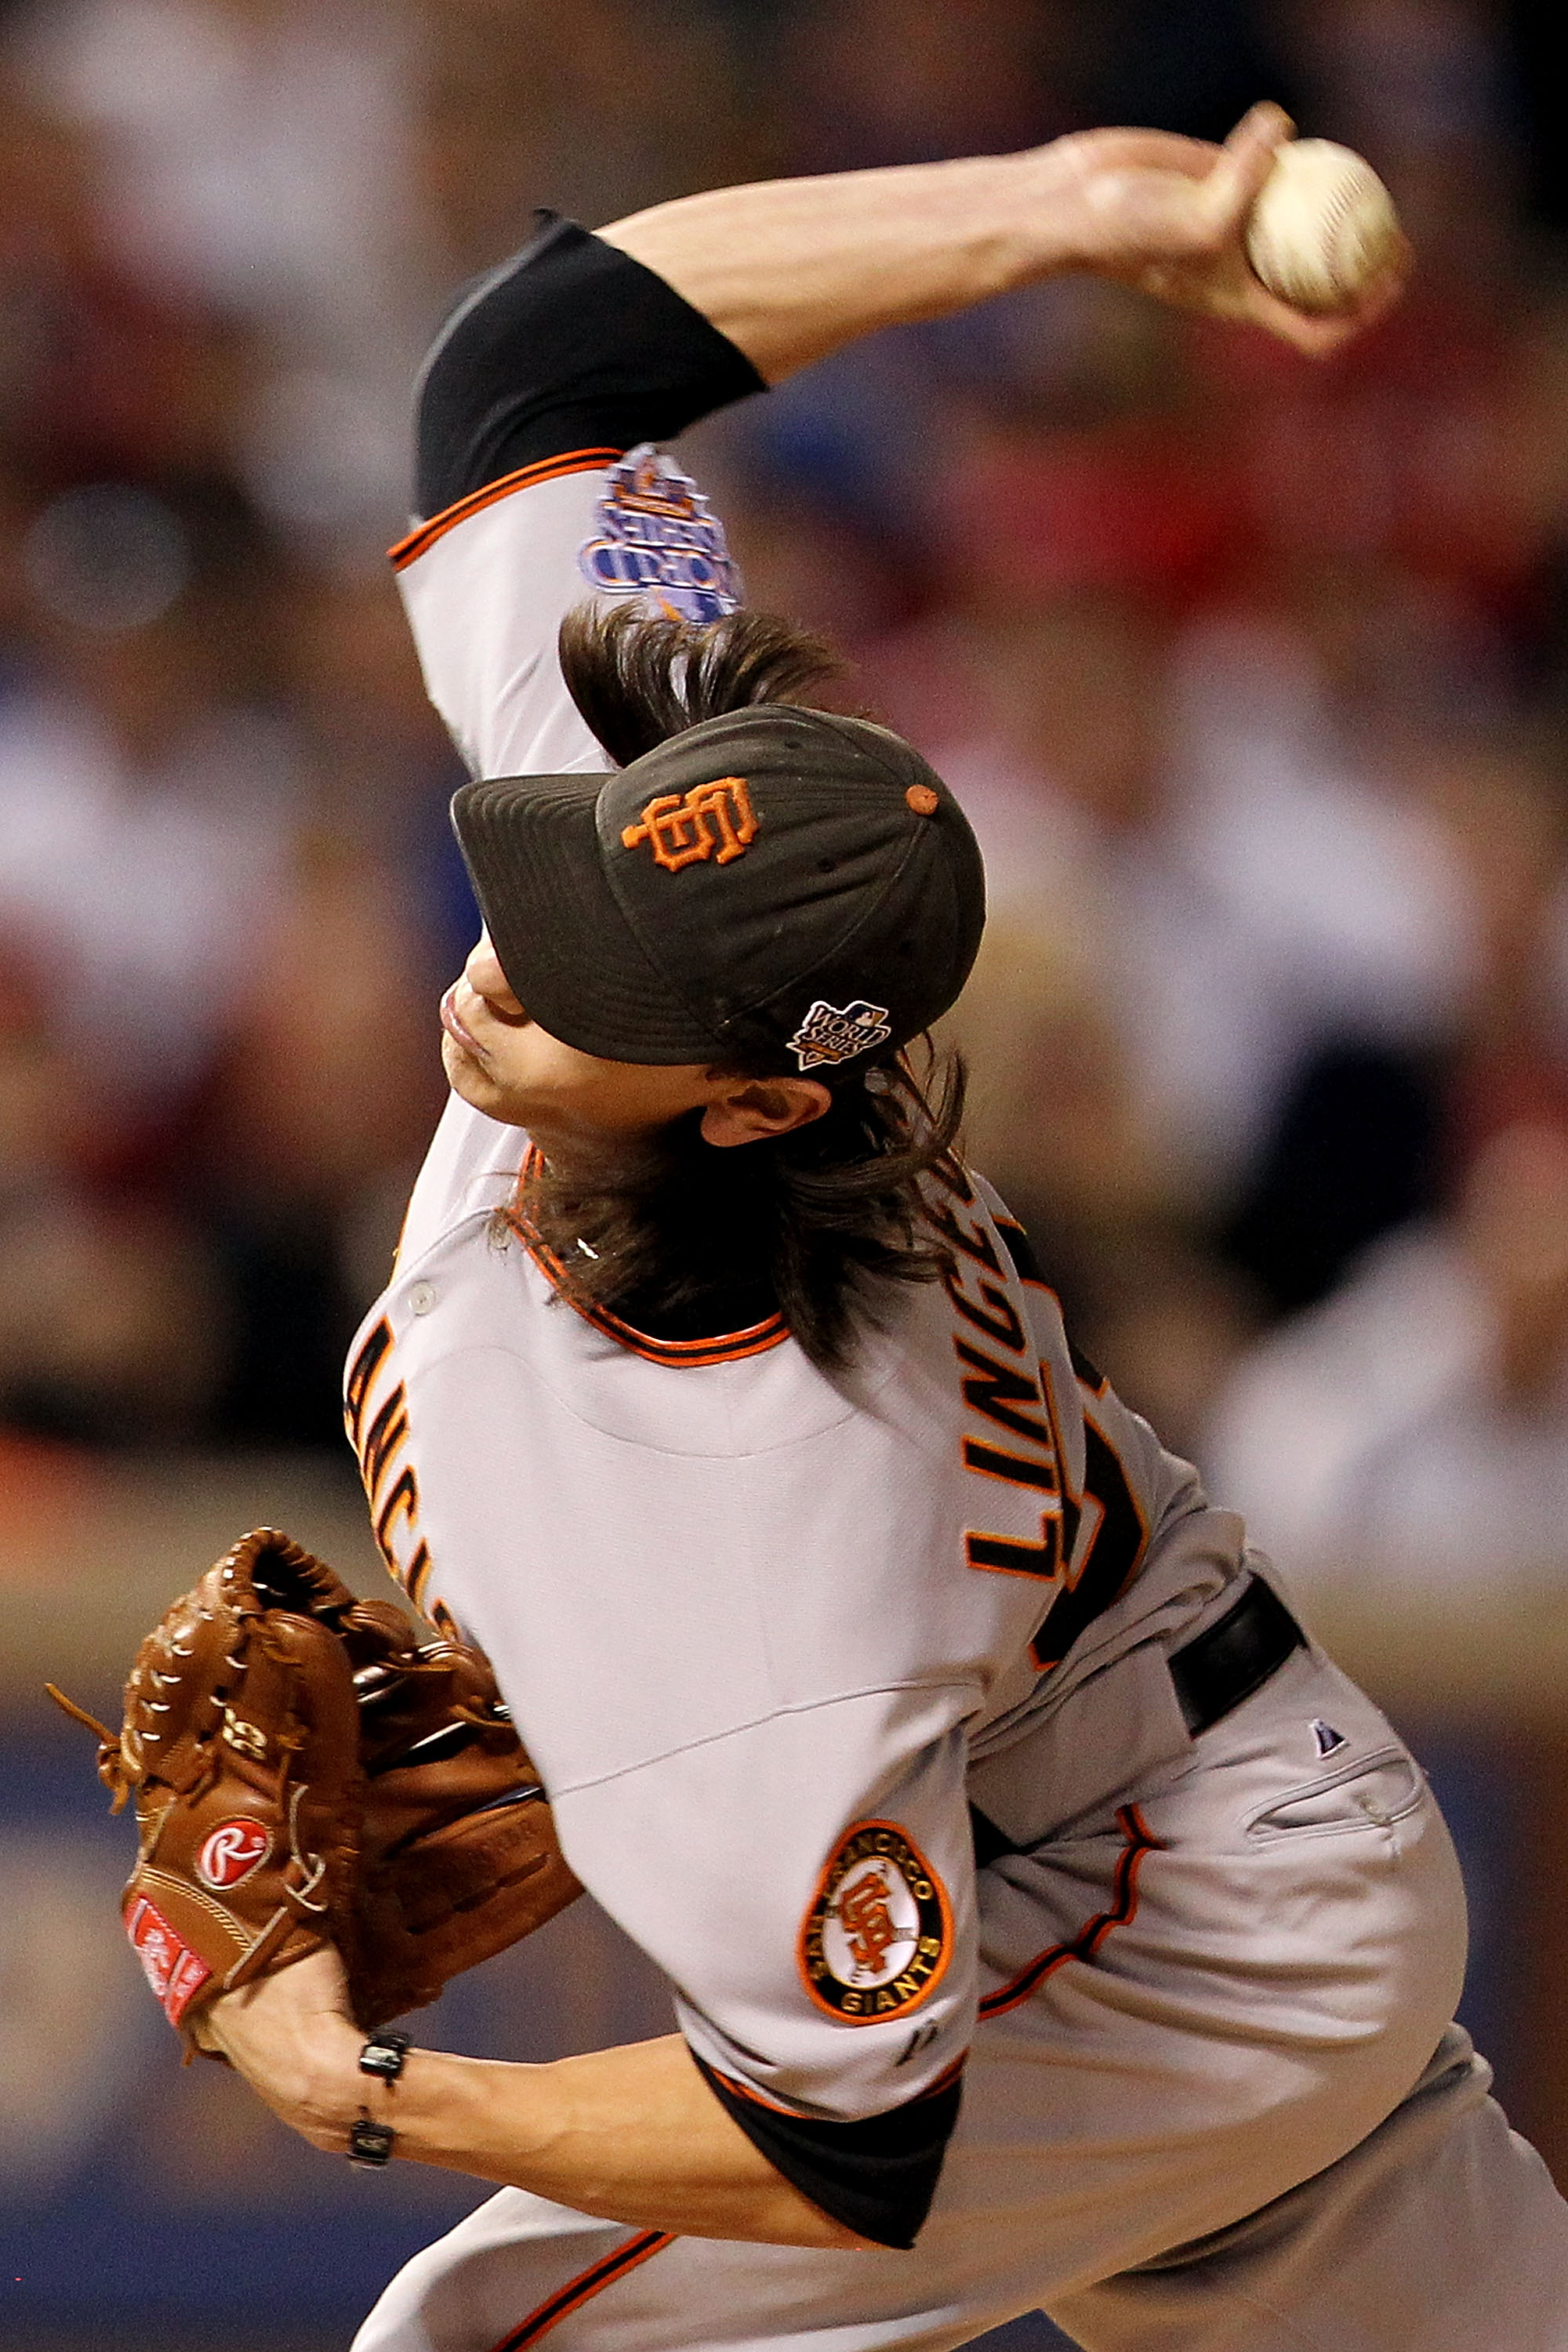 ARLINGTON, TX - NOVEMBER 01:  Starting pitcher Tim Lincecum #55 of the San Francisco Giants pitches against the Texas Rangers in Game Five of the 2010 MLB World Series at Rangers Ballpark in Arlington on November 1, 2010 in Arlington, Texas.  (Photo by Ro